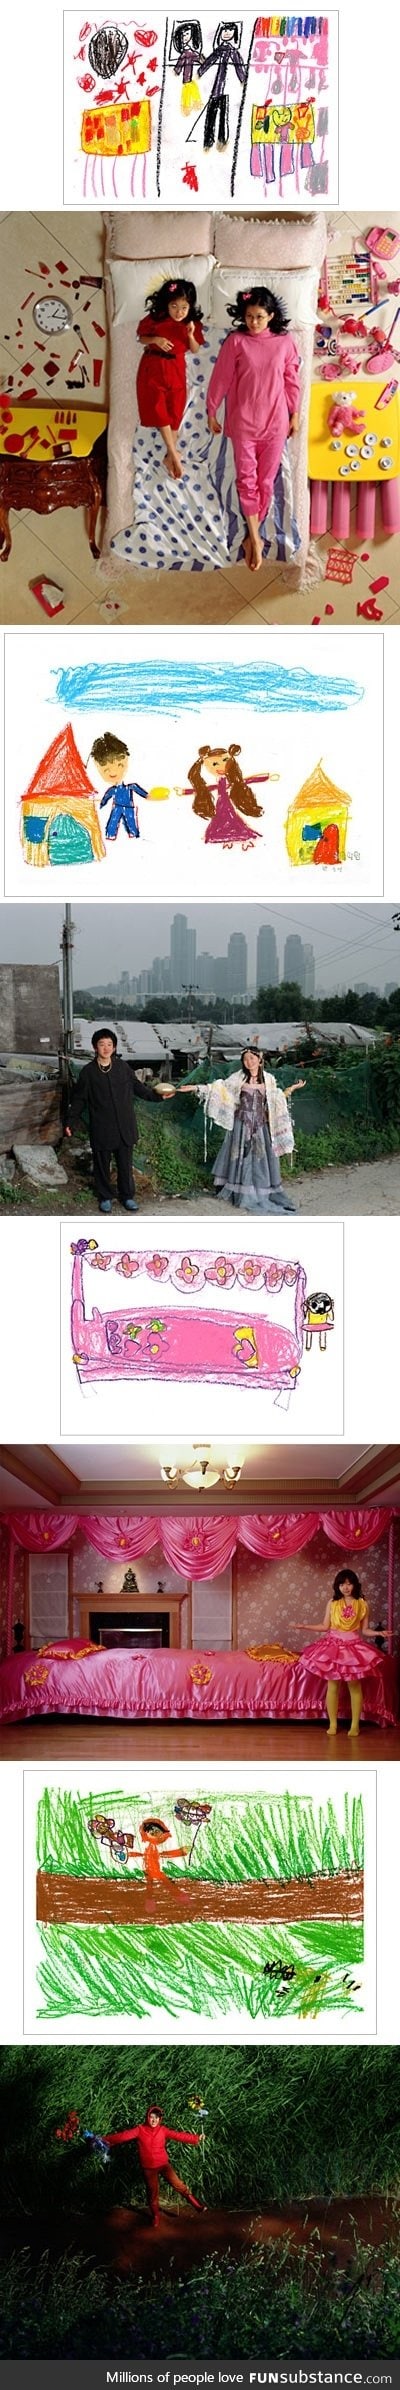 Kids' drawings turned into reality